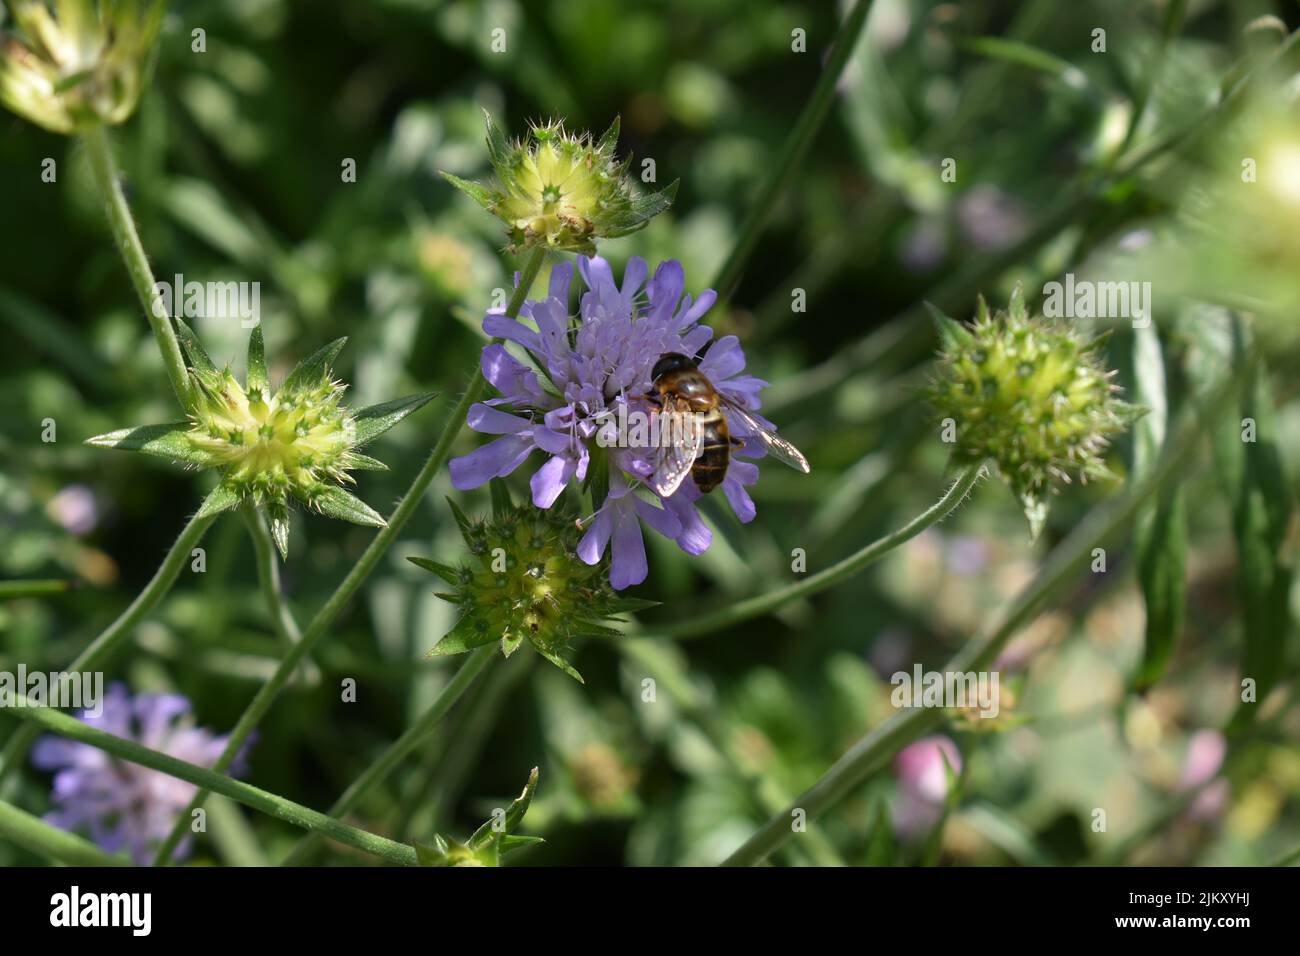 A close up shot of a bee on a flower - Scabiosa 'Butterfly Blue'. Stock Photo